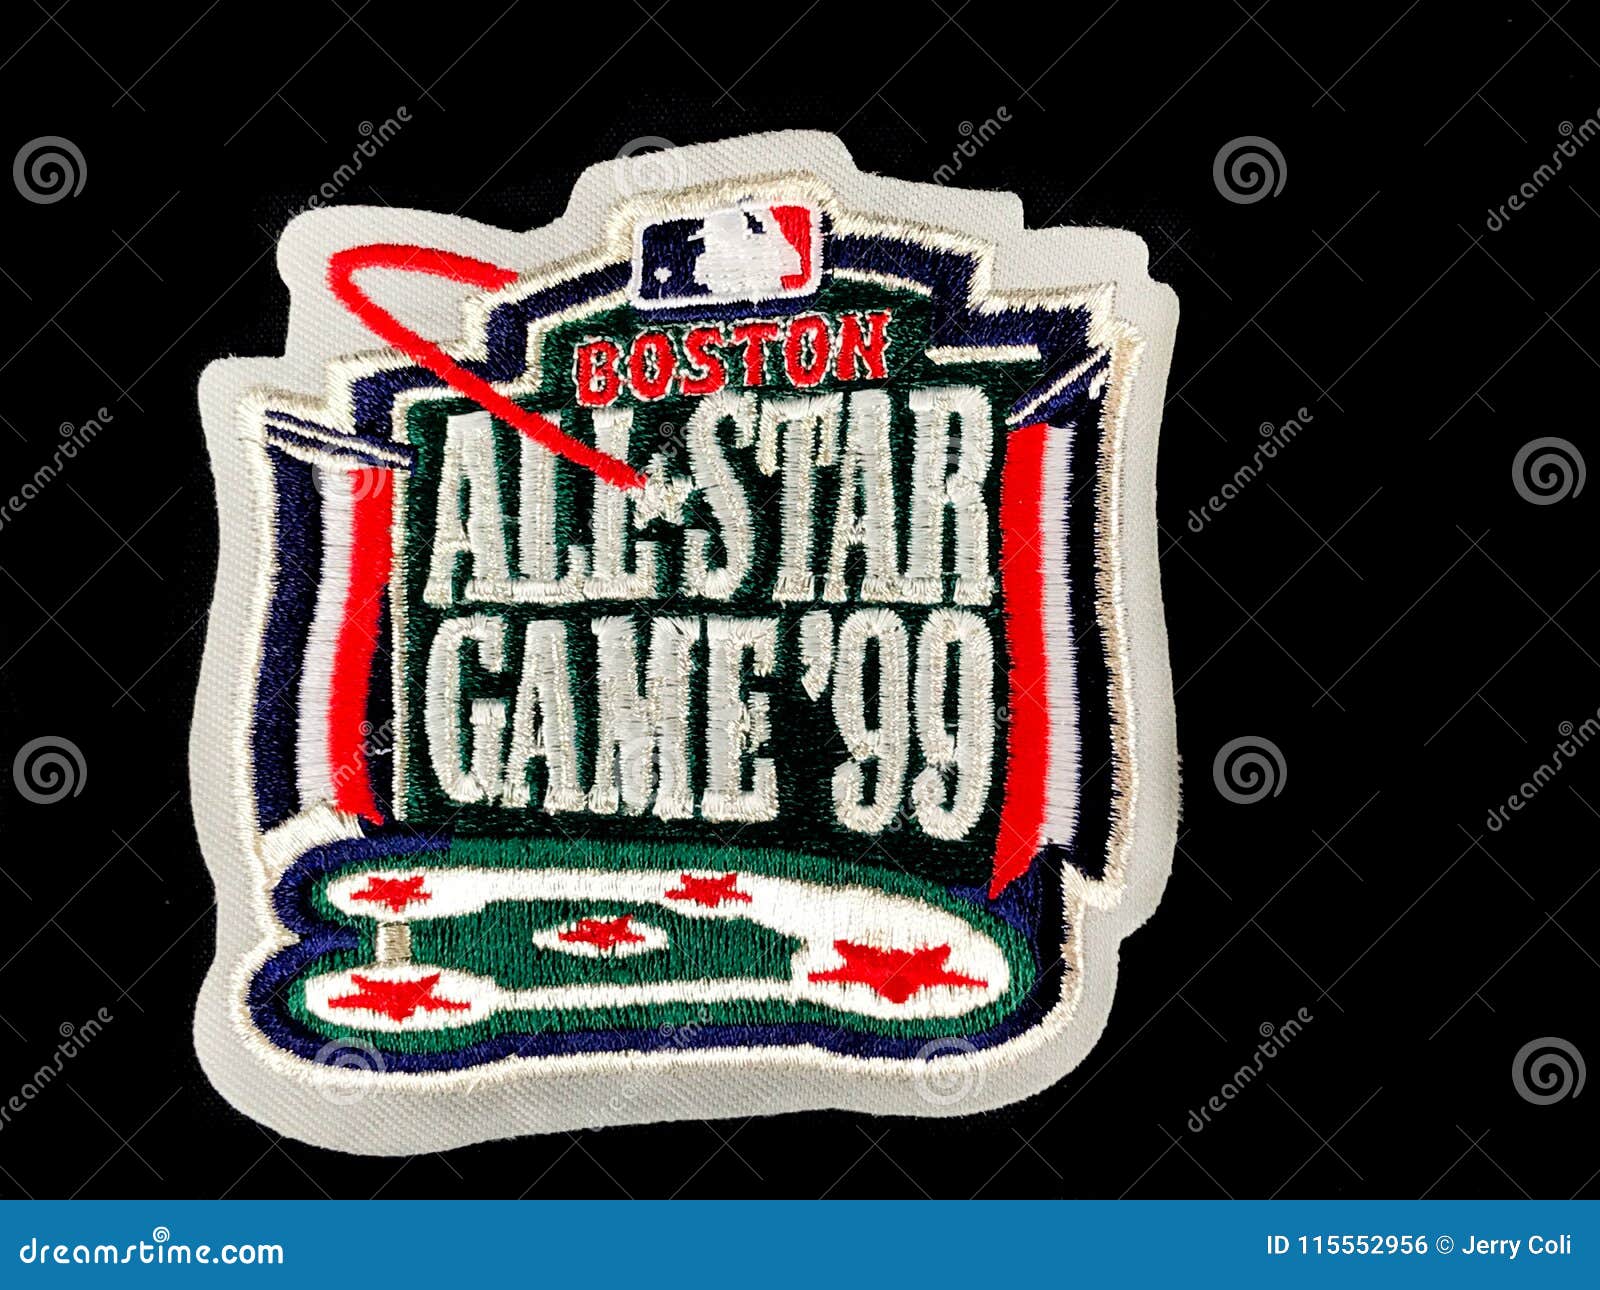 1999 MLB All-Star Patch on a Black Backdrop Editorial Photo